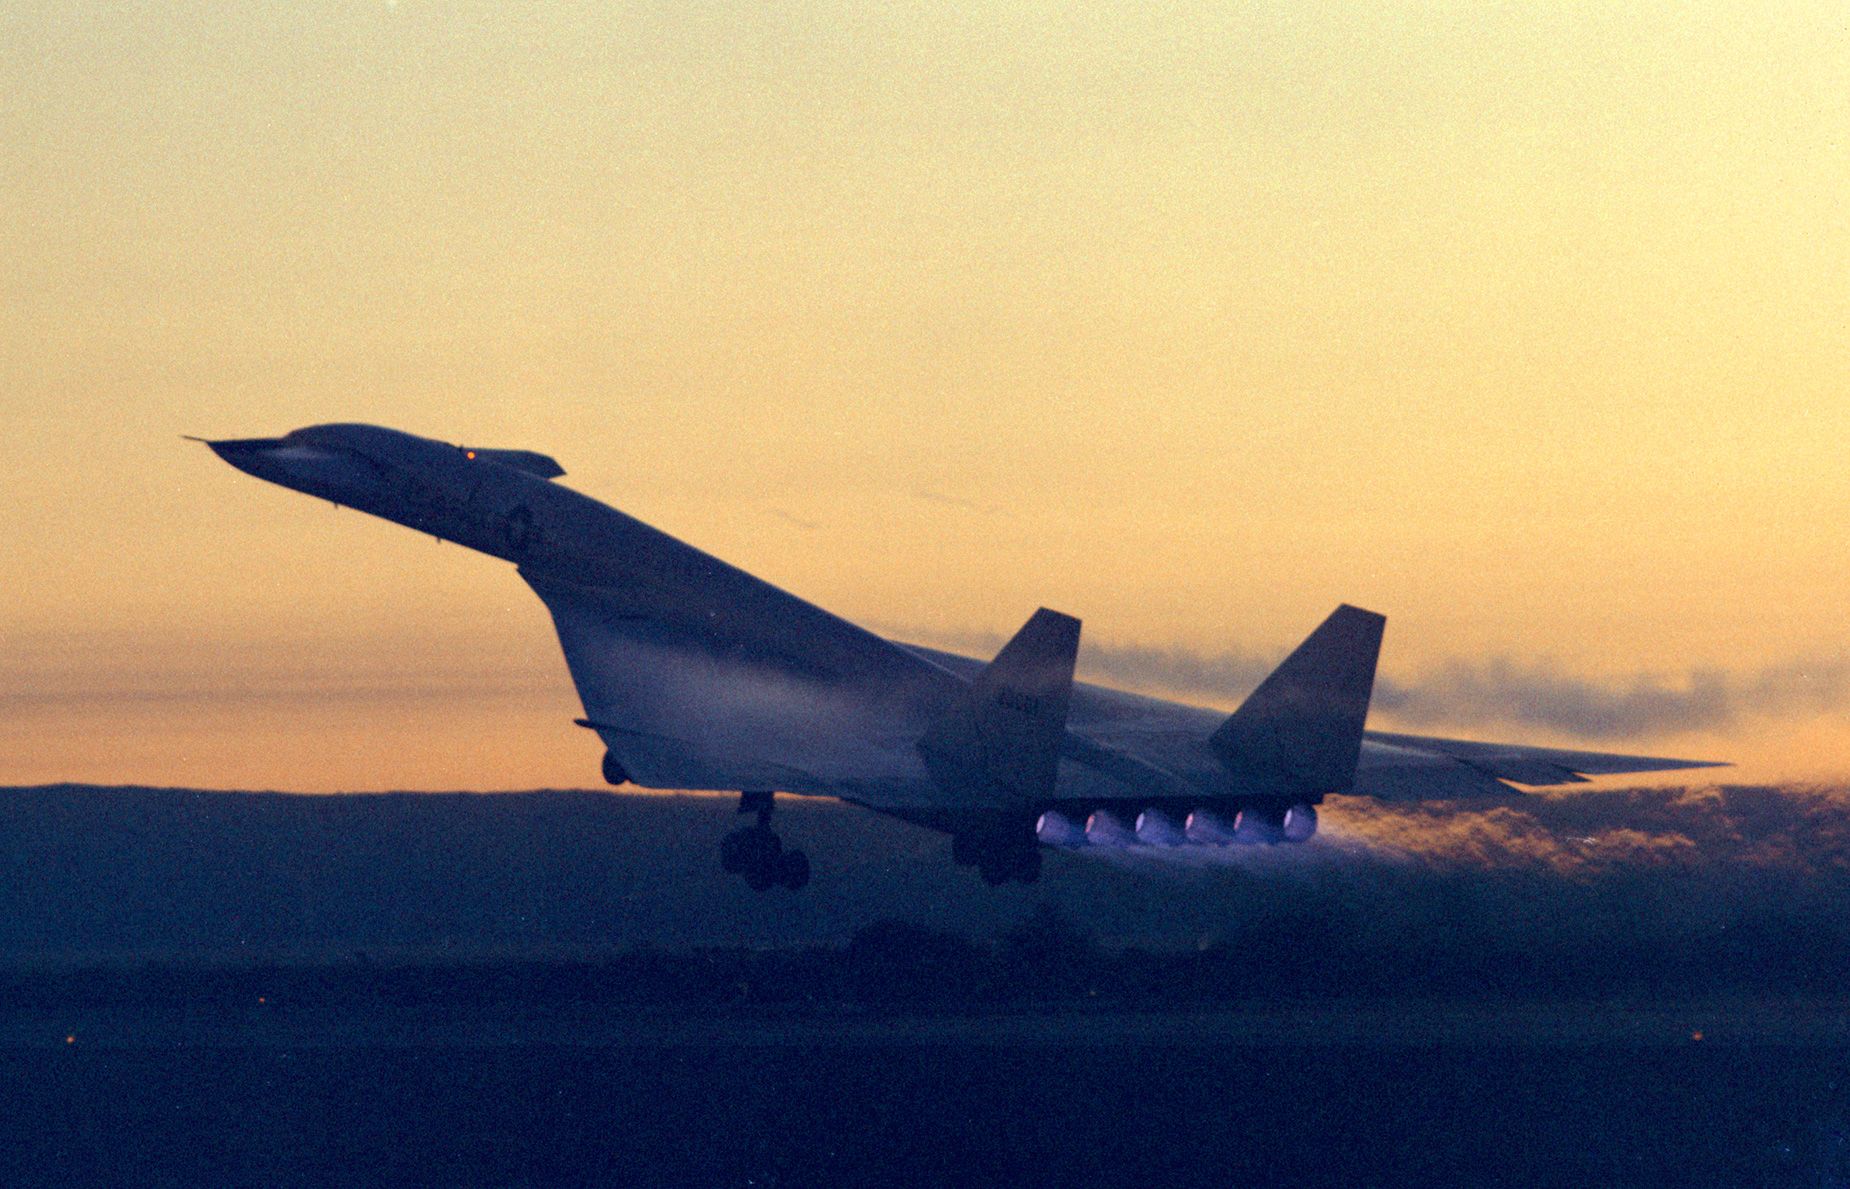 supersonic aircraft xb-70 valkyrie